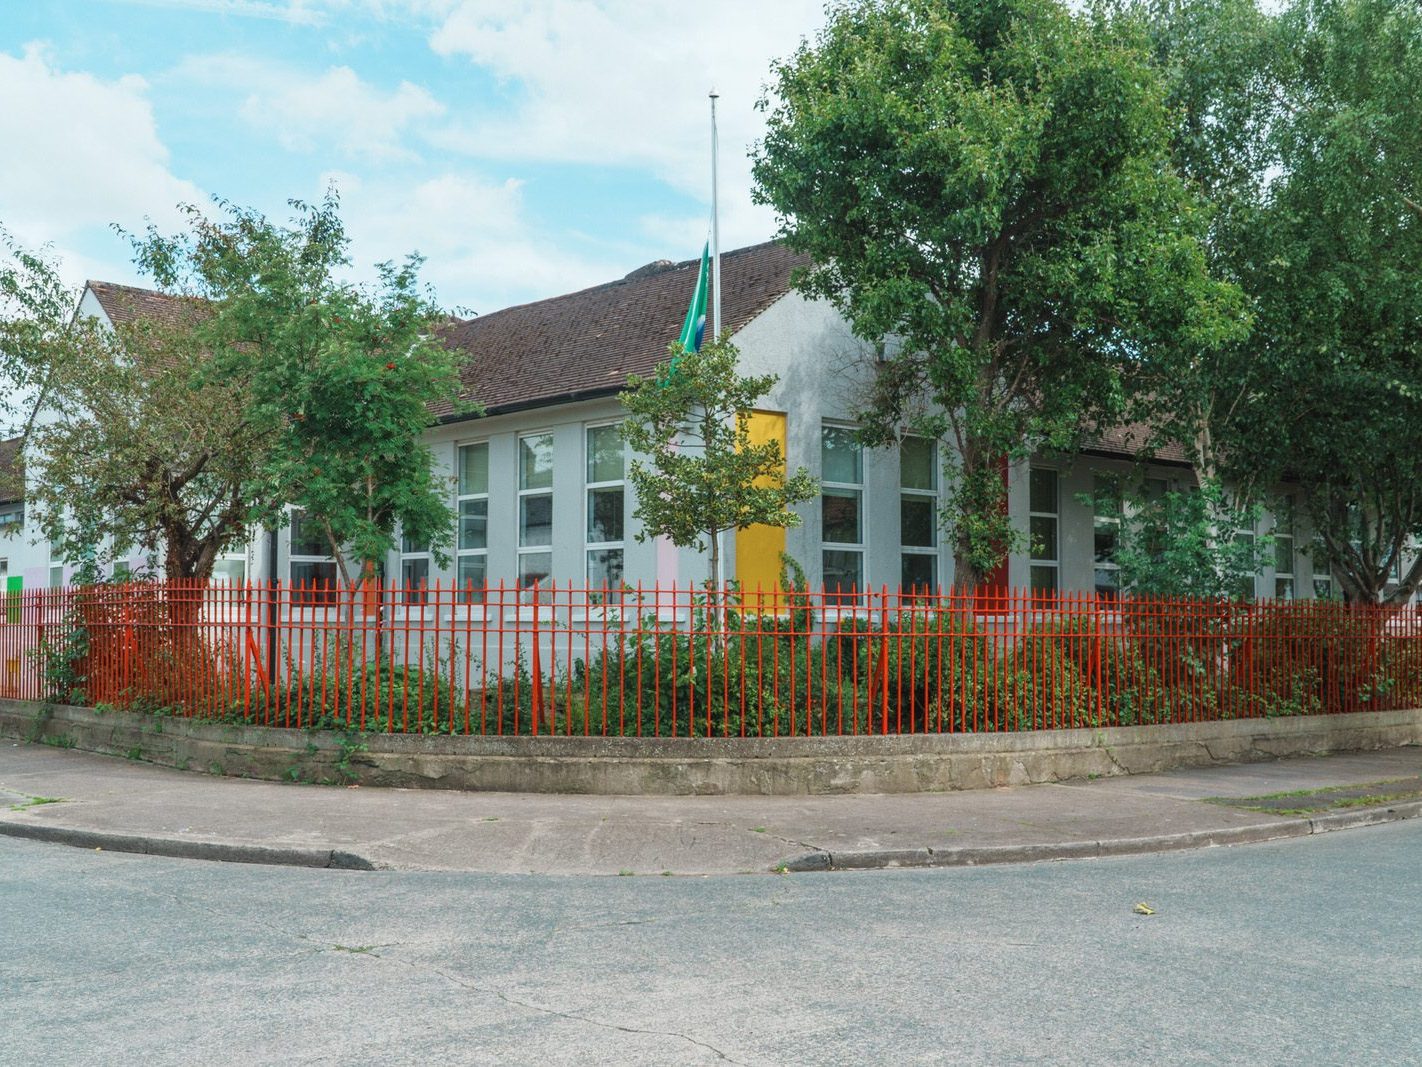 THE AREA OF CABRA NEAR THE CHURCH OF CHRIST THE KING [THE BUILDING IS ON OFFALY ROAD AND THERE IS A SCHOOL NEXT TO IT] 013